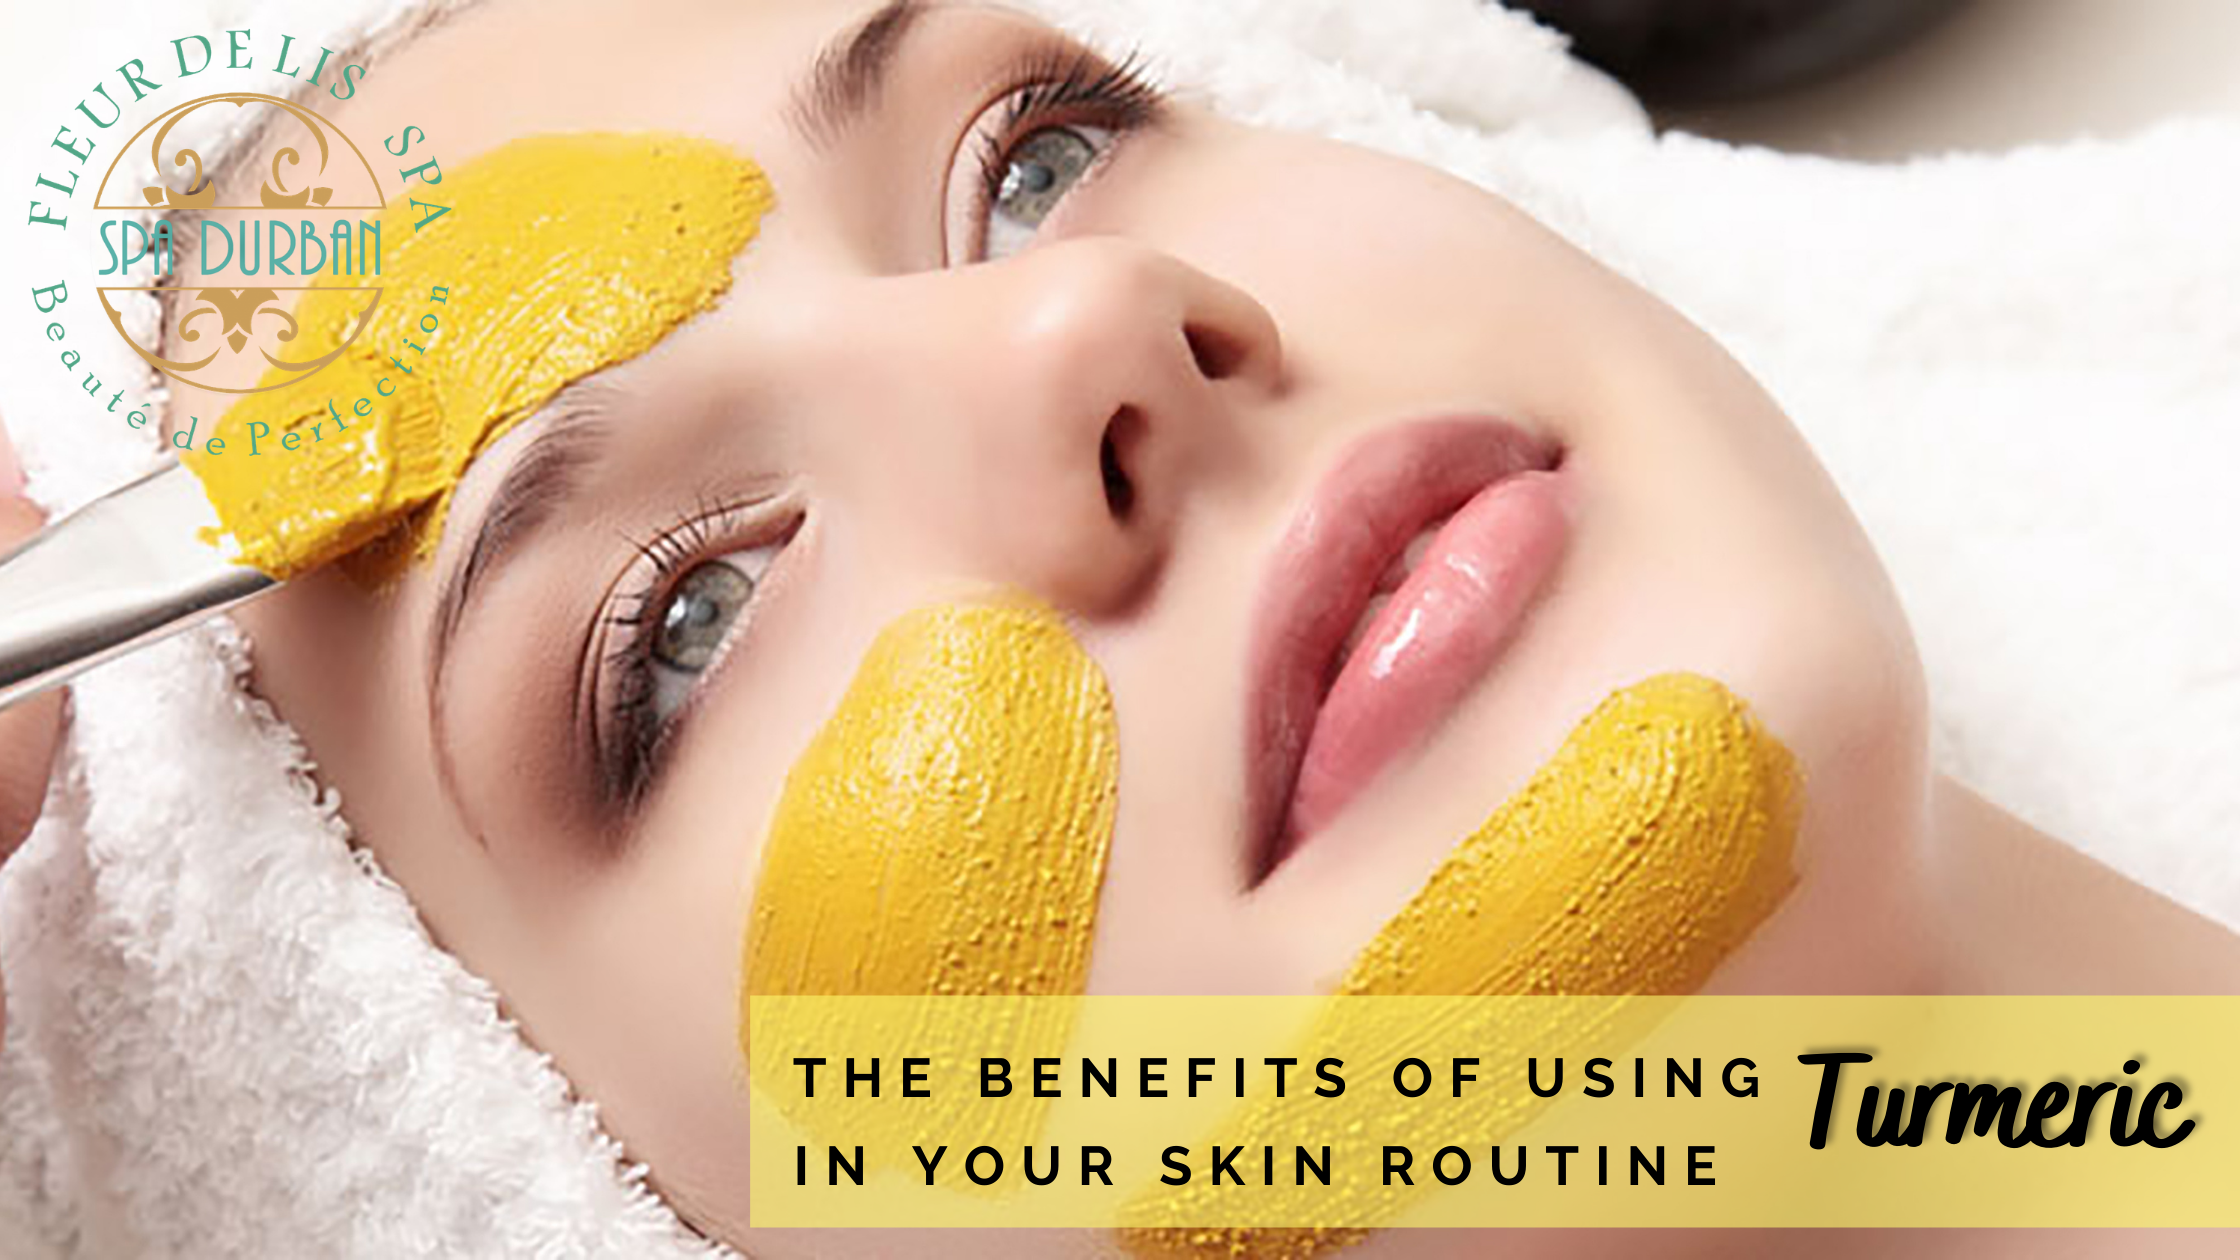 The Benefits of Using Turmeric in Your Skin Routine